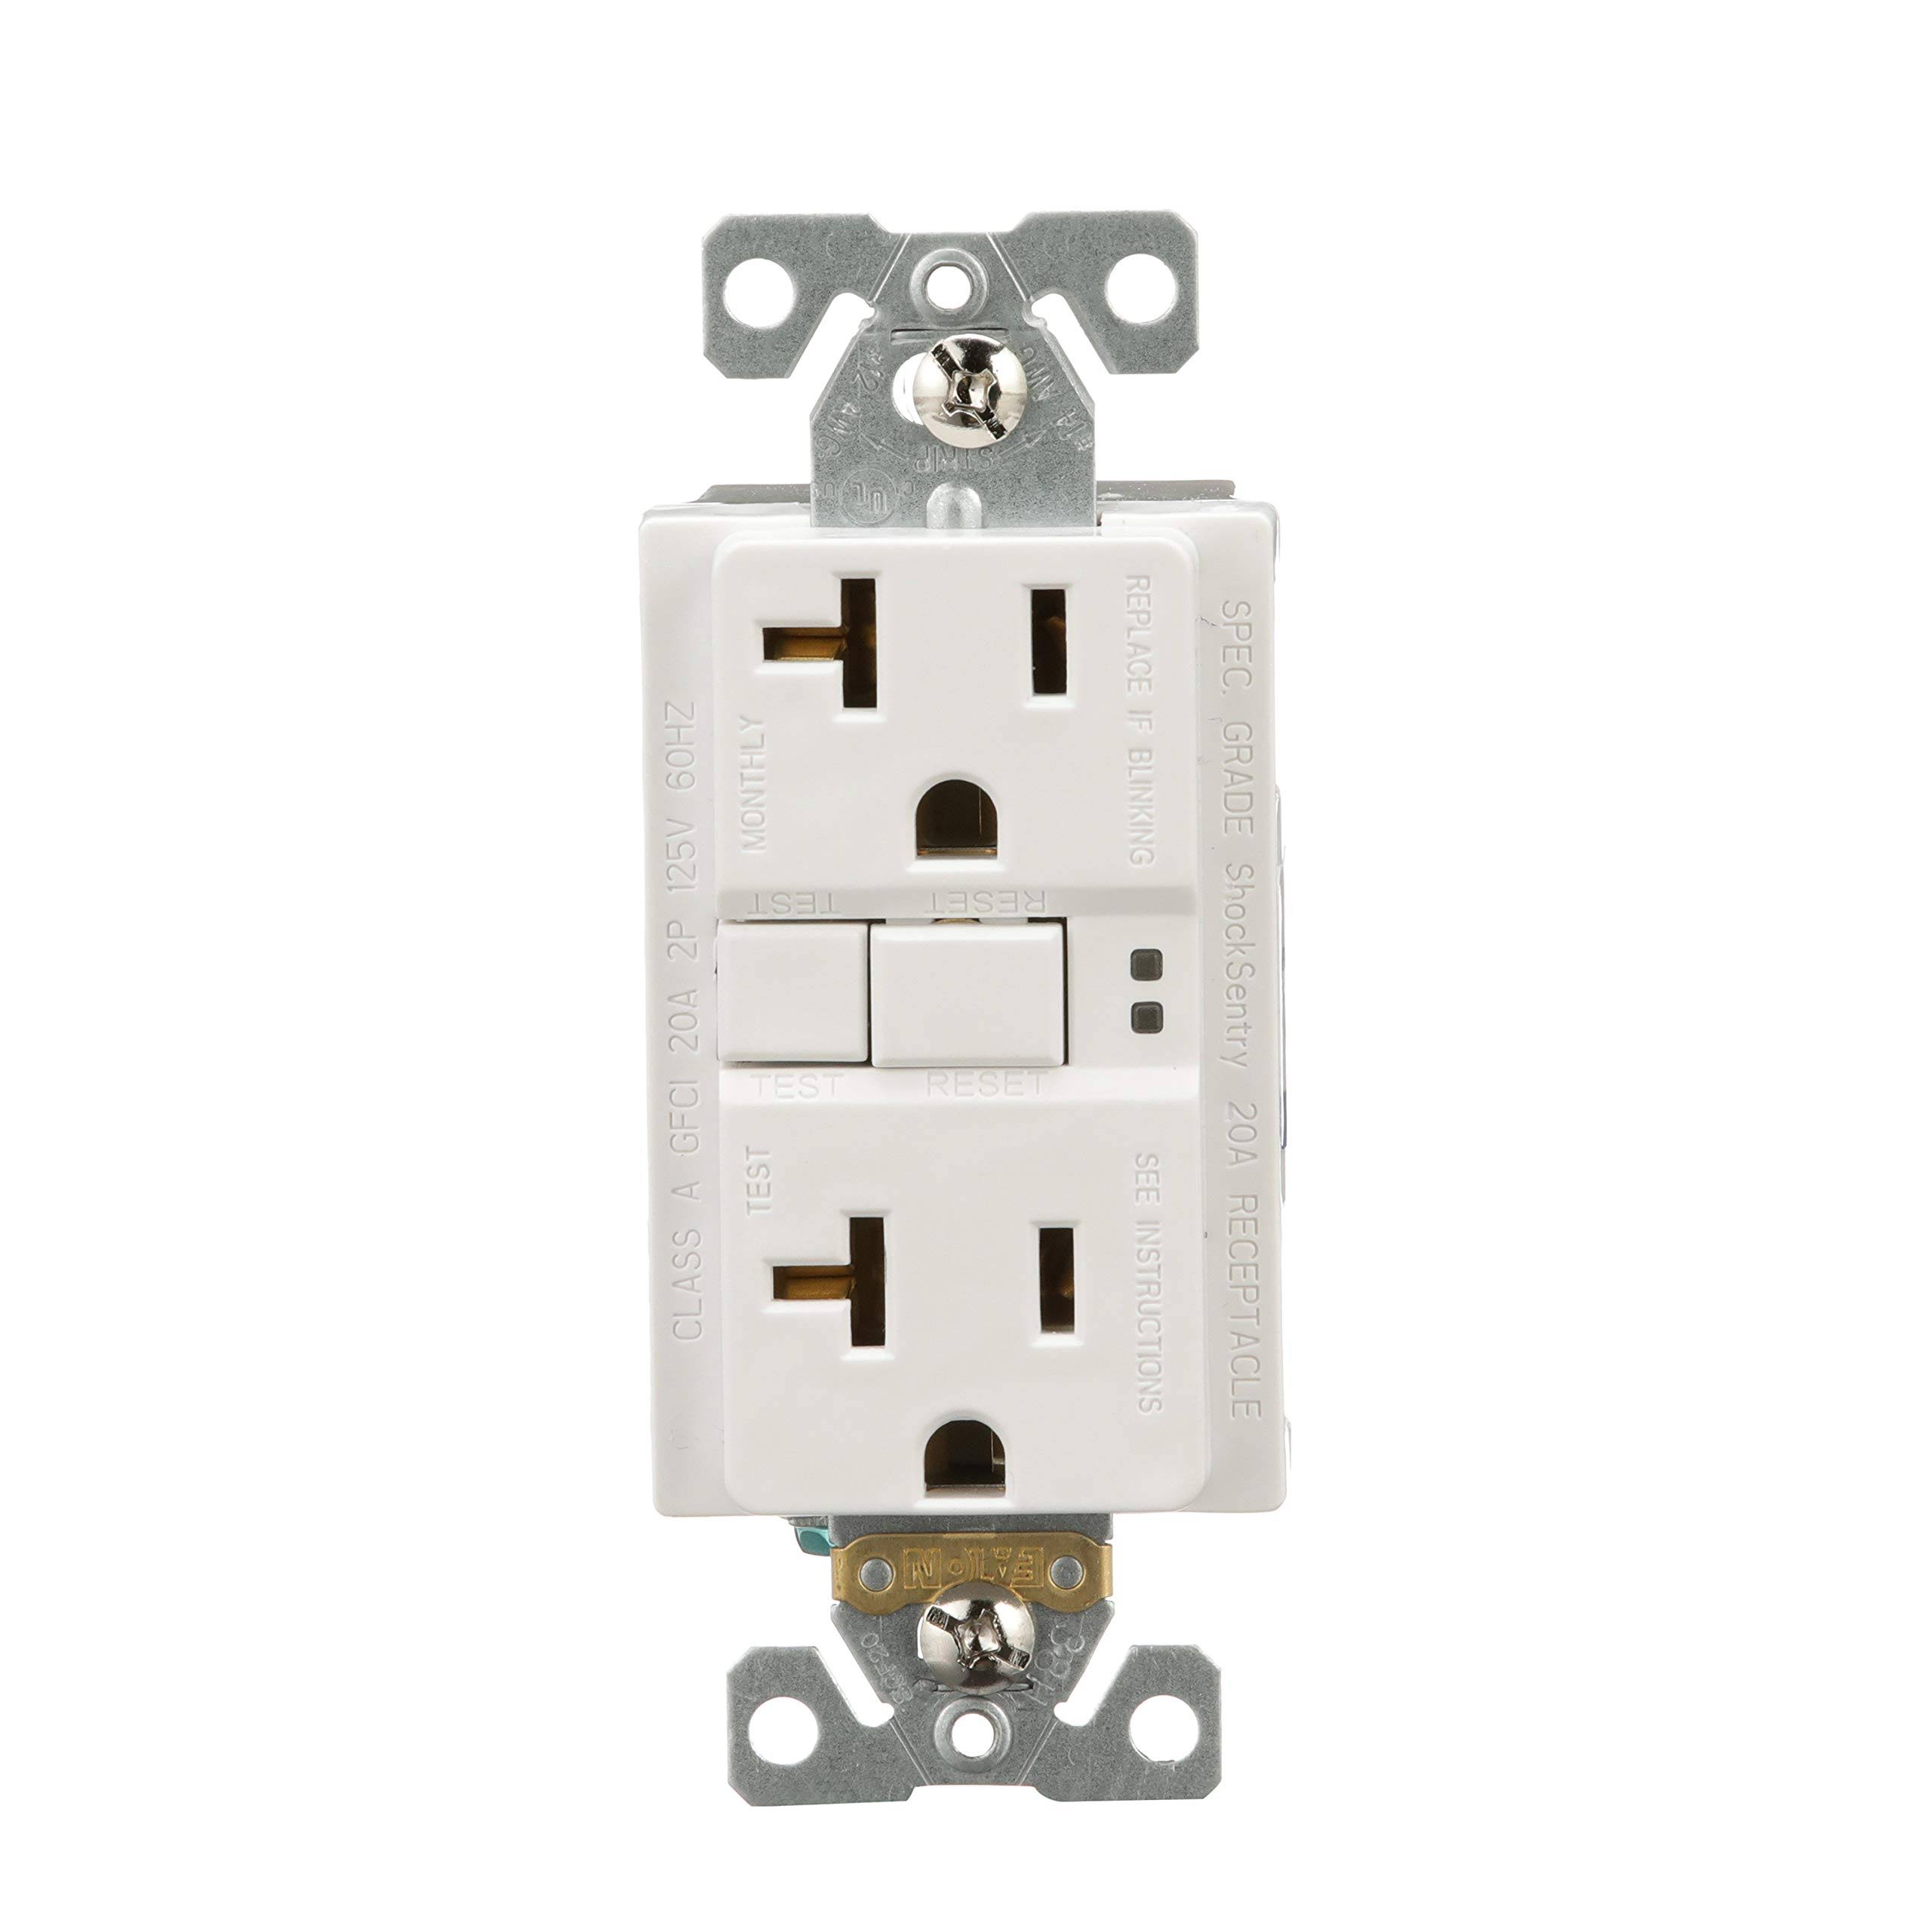 Eaton GFCI Self-Test Duplex Receptacle with Standard Wallplate - White, 20A, 125V